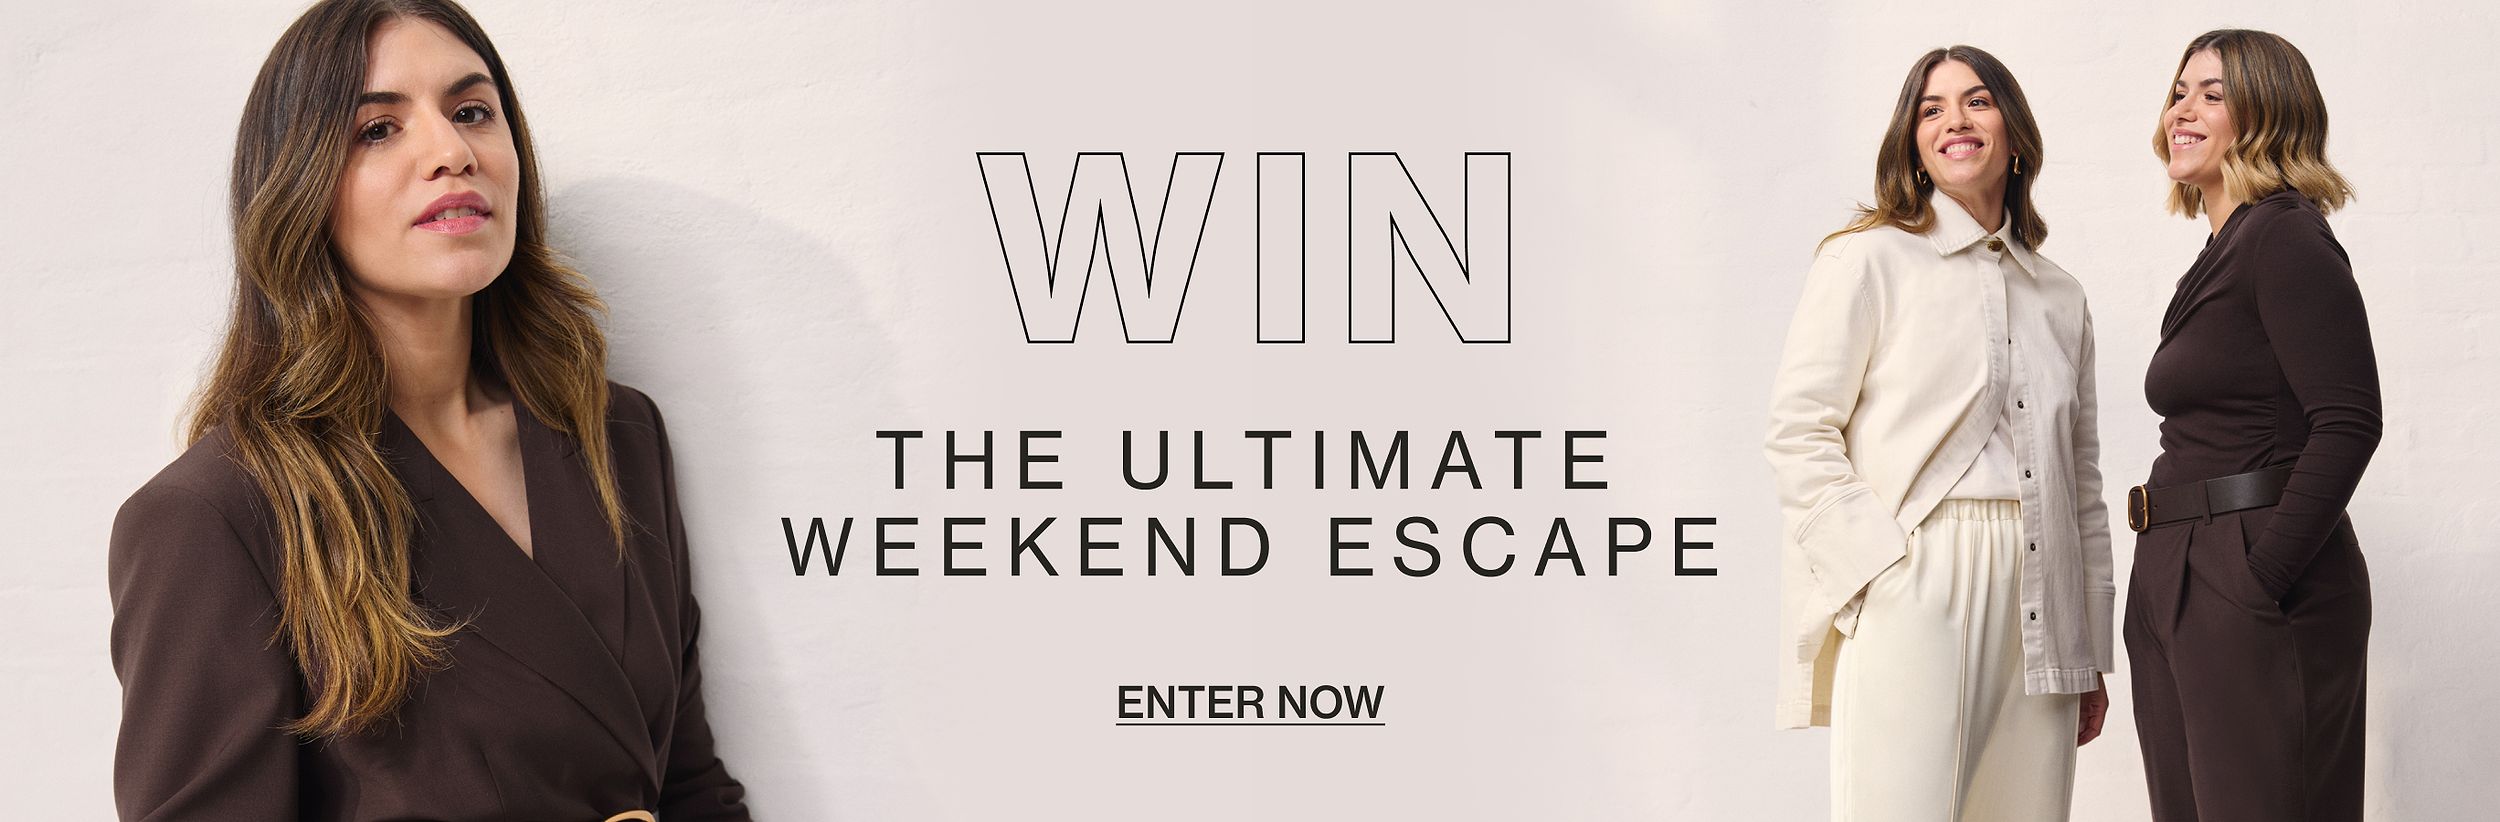 Win the ultimate weekend escape. Enter Now.